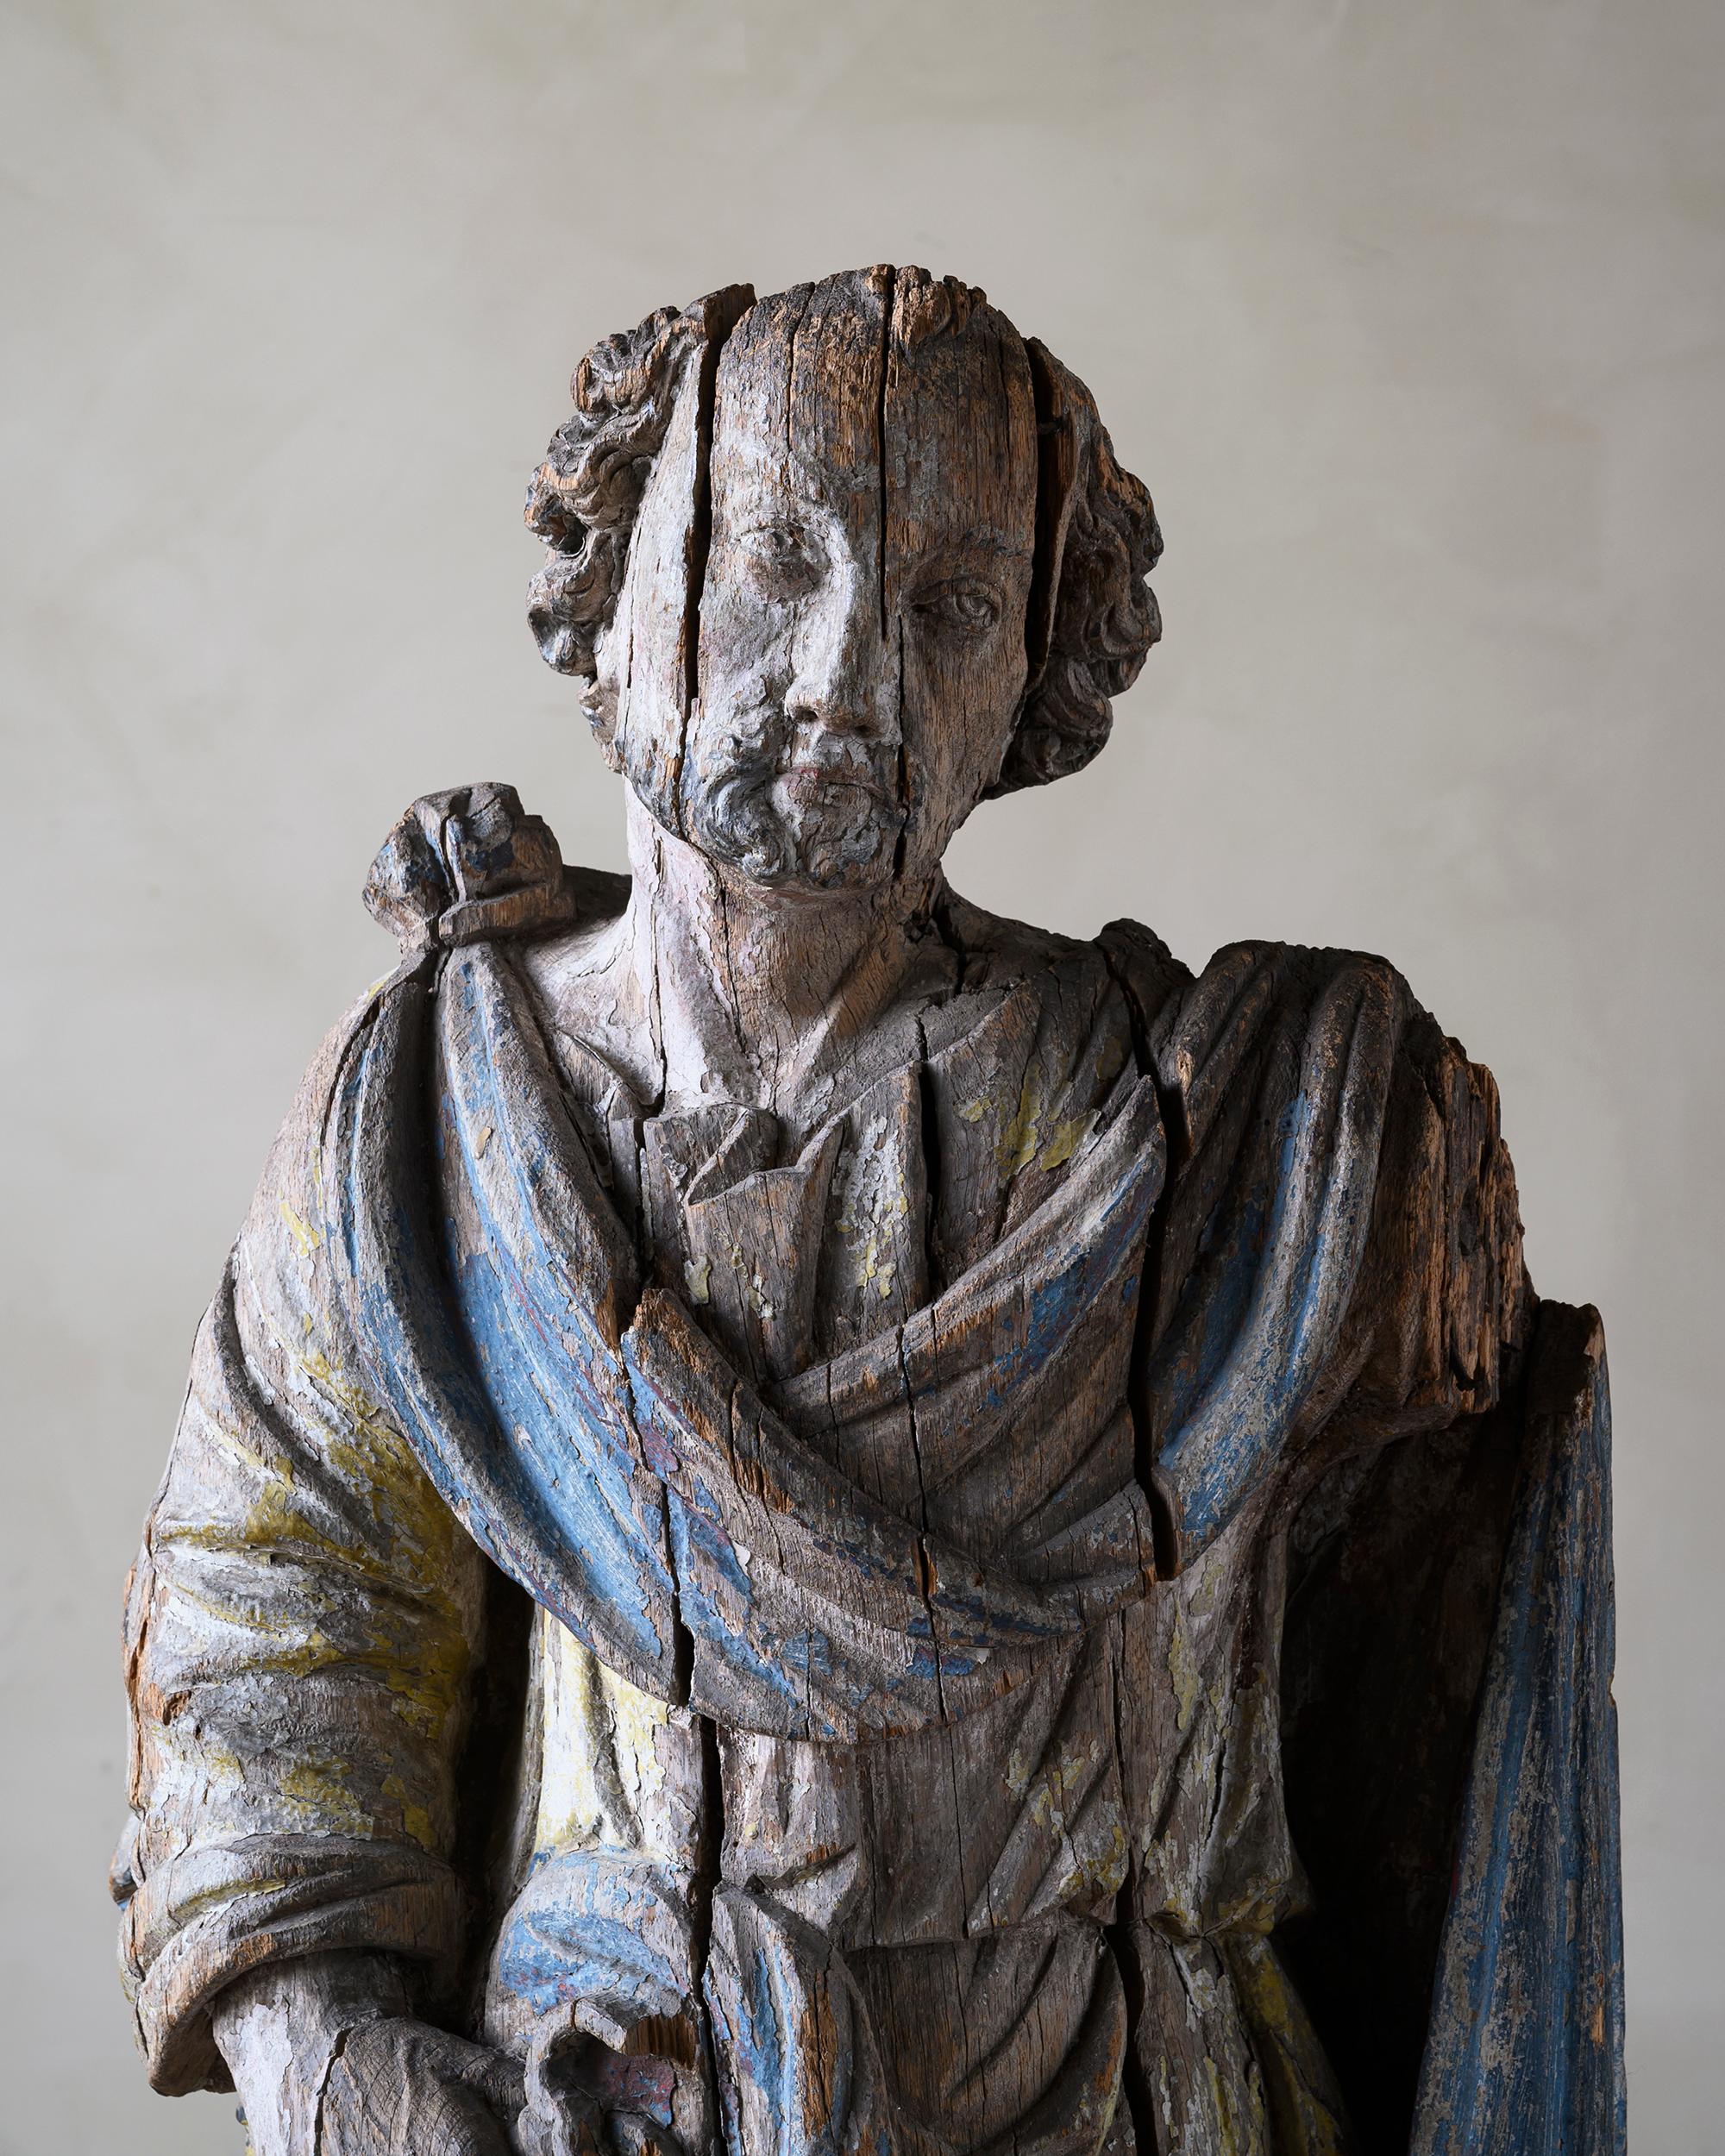 Swedish 17th Century Wooden Sculpture of St Peter